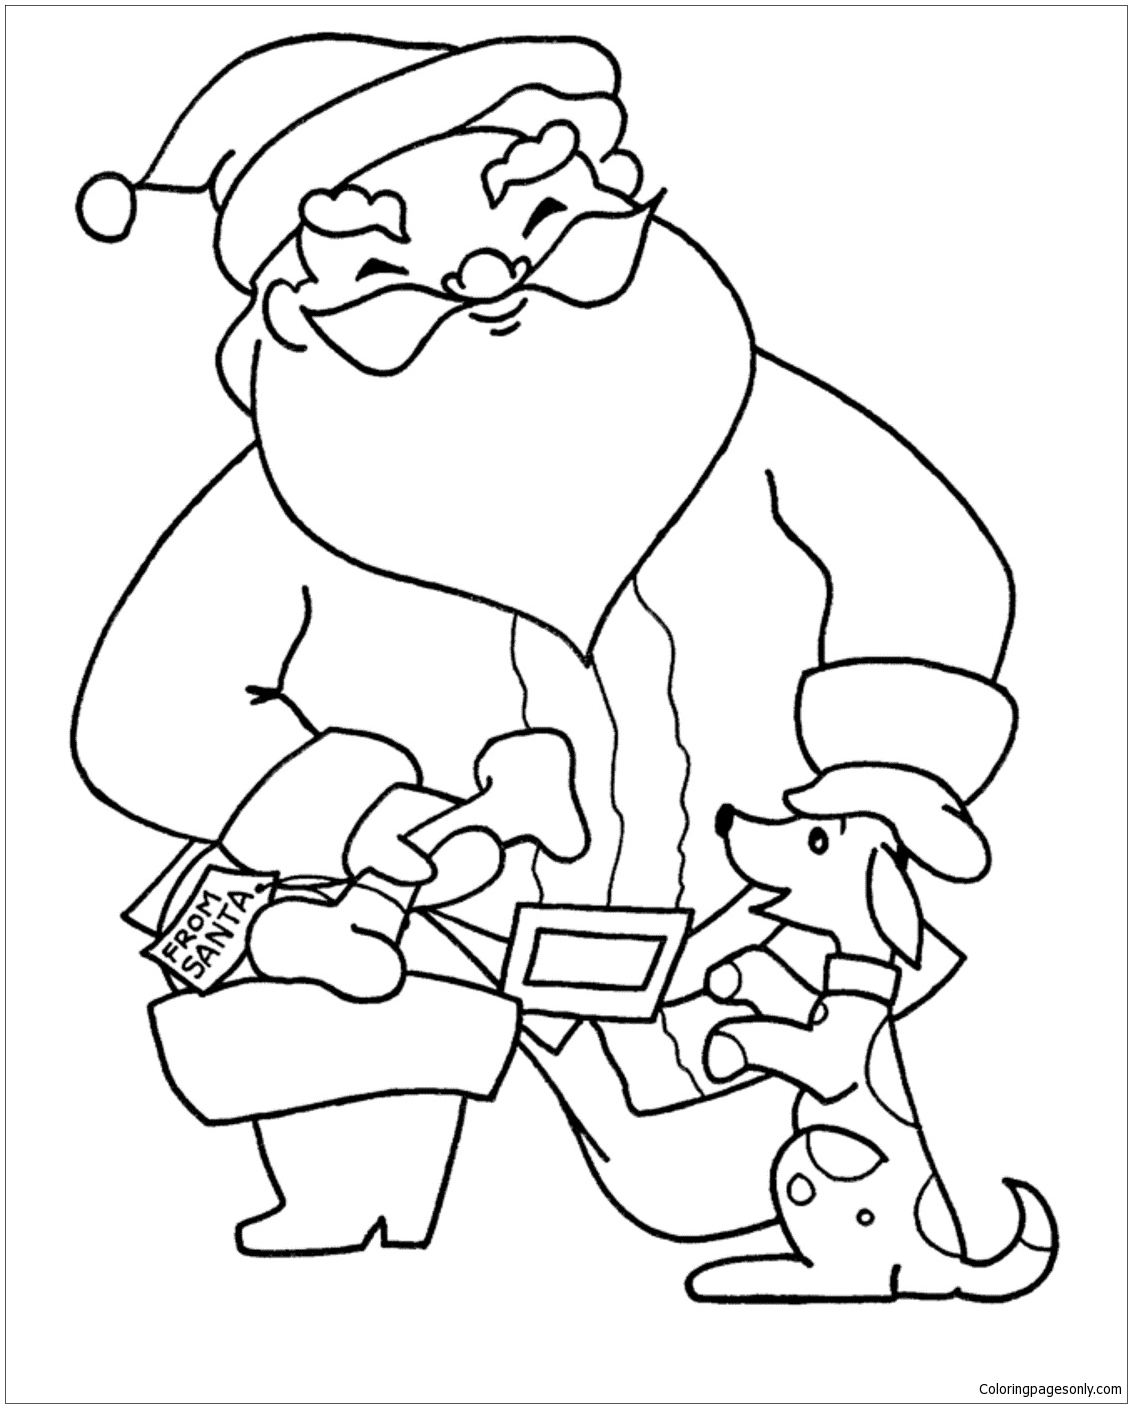 Santa Gives A Bone For Bumps Christmas Coloring Pages